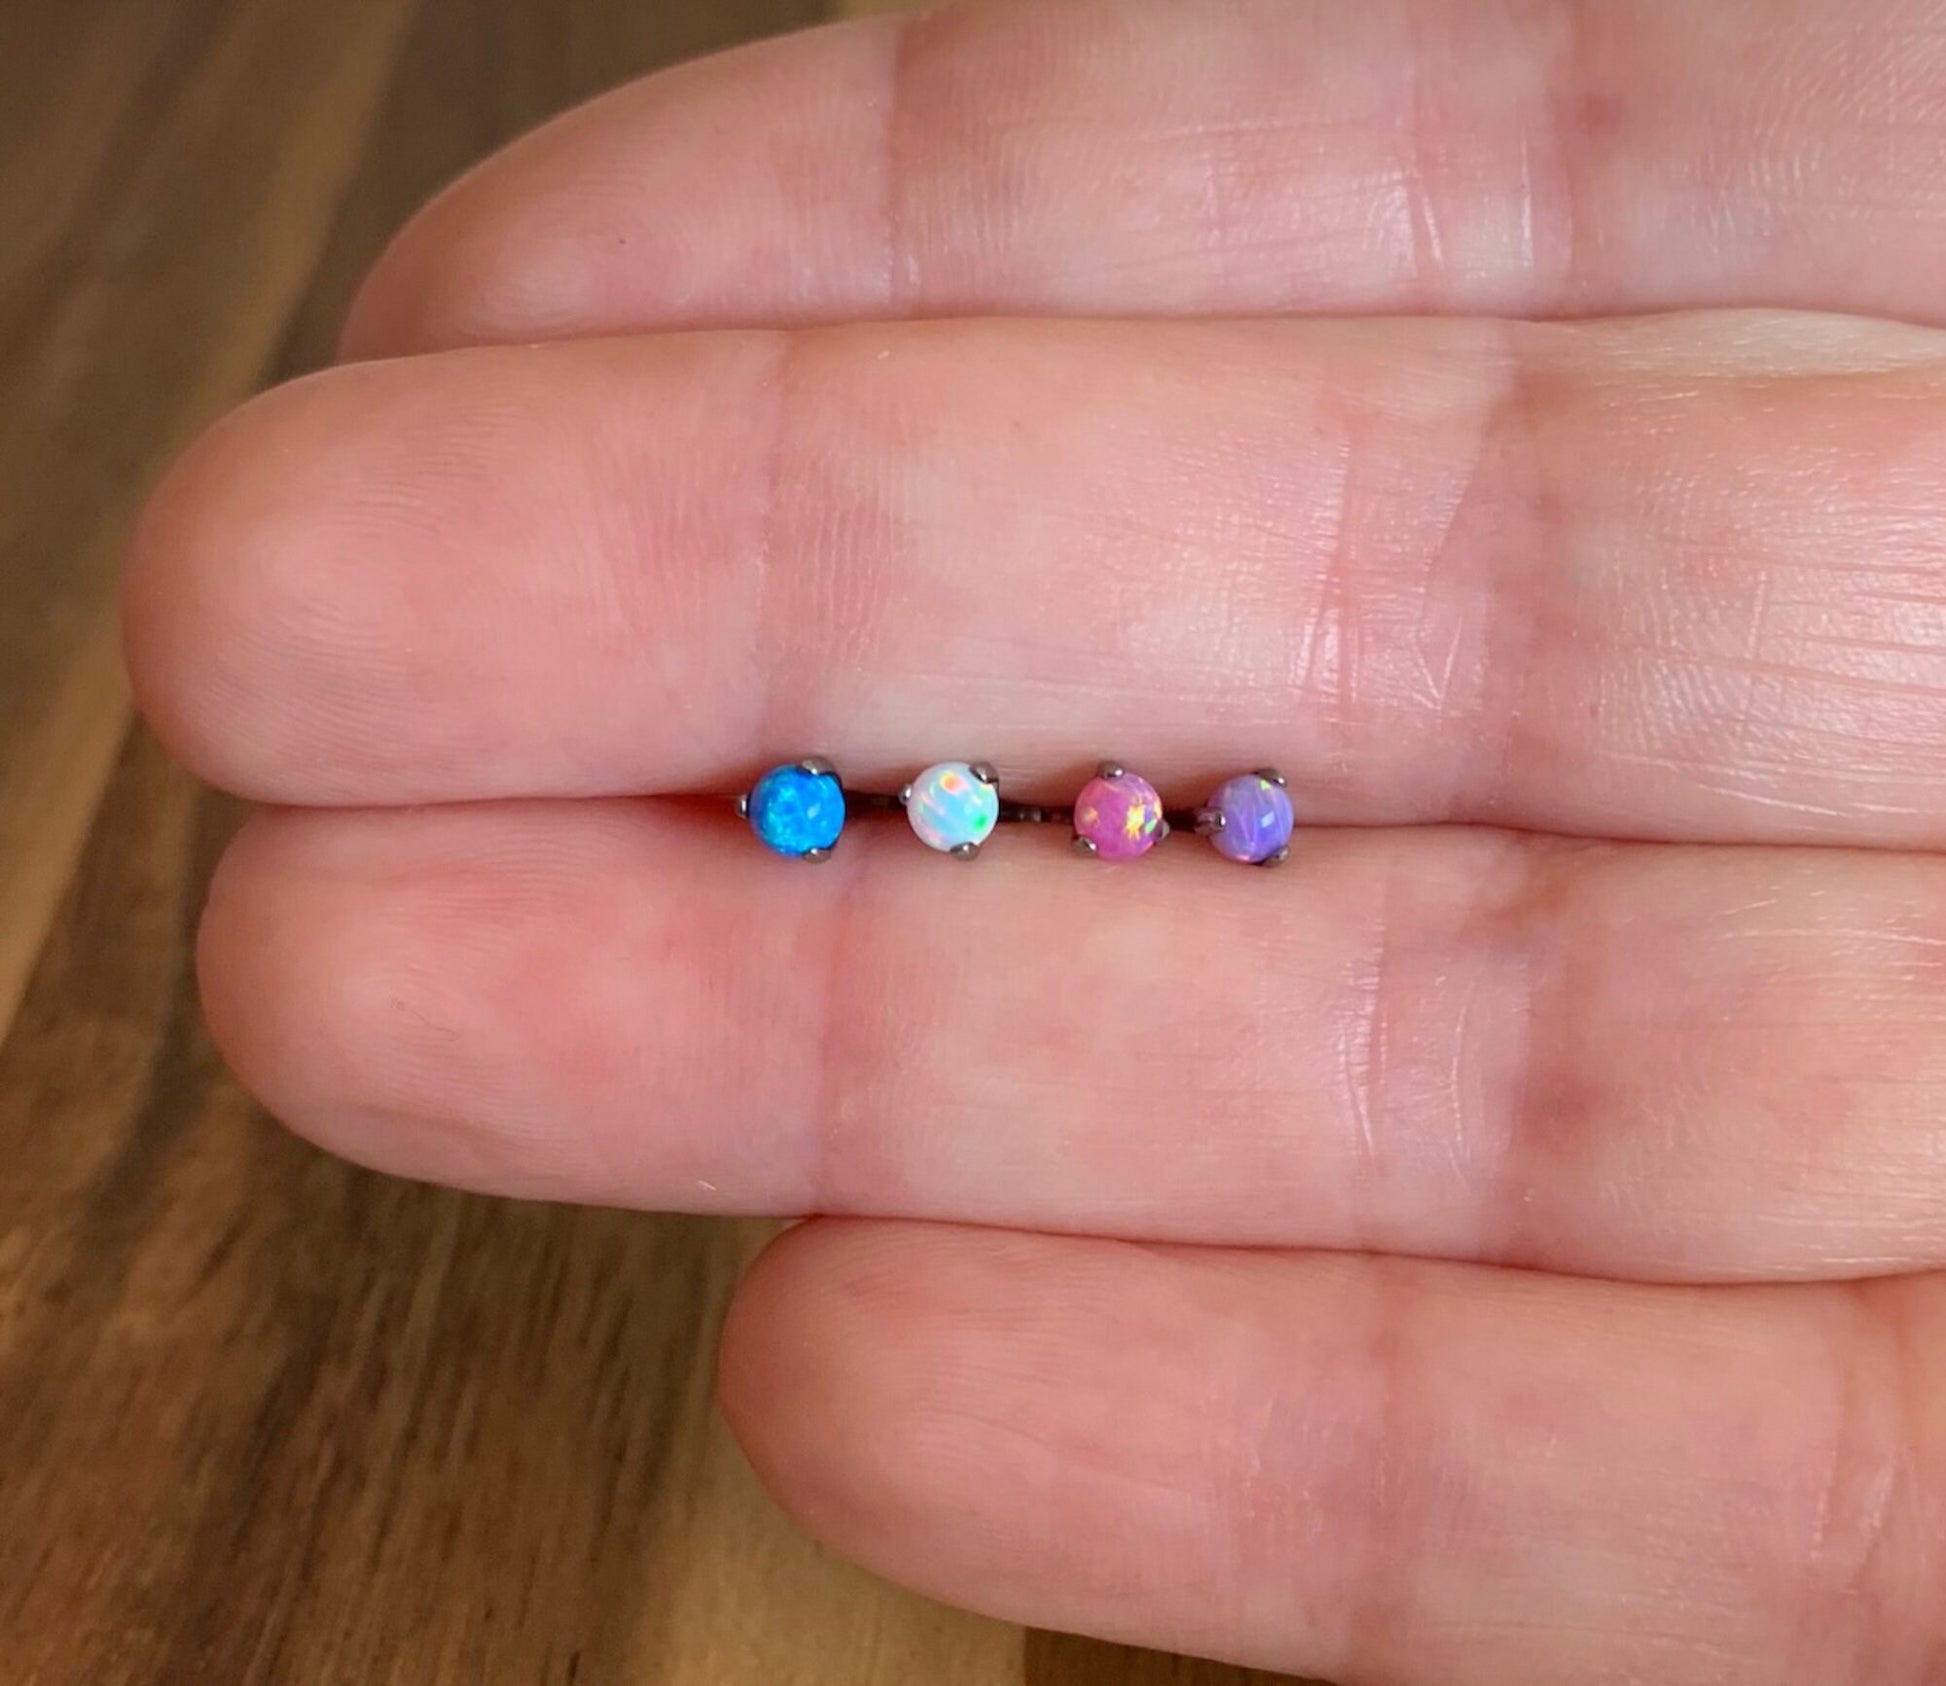 1 Piece Claw 3 Prong Opal Ball Titanium Labret-Monroe-Stud-Lip Ring-Helix Ear Cartilage - 16g - 5/8" (8mm) - Can be used for many piercings!